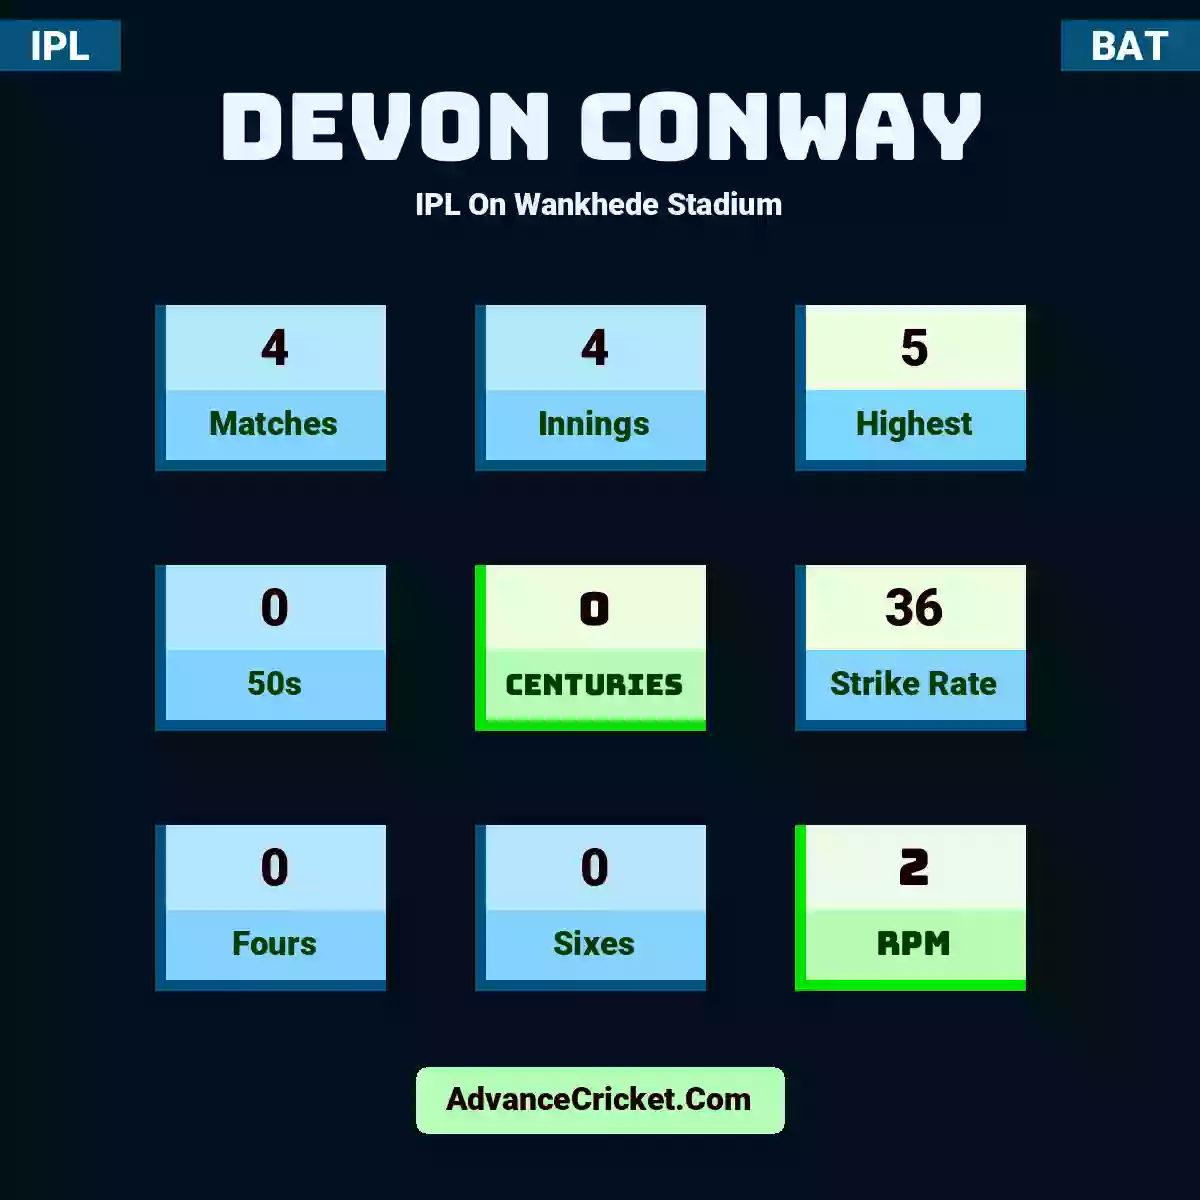 Devon Conway IPL  On Wankhede Stadium, Devon Conway played 4 matches, scored 5 runs as highest, 0 half-centuries, and 0 centuries, with a strike rate of 36. D.Conway hit 0 fours and 0 sixes, with an RPM of 2.